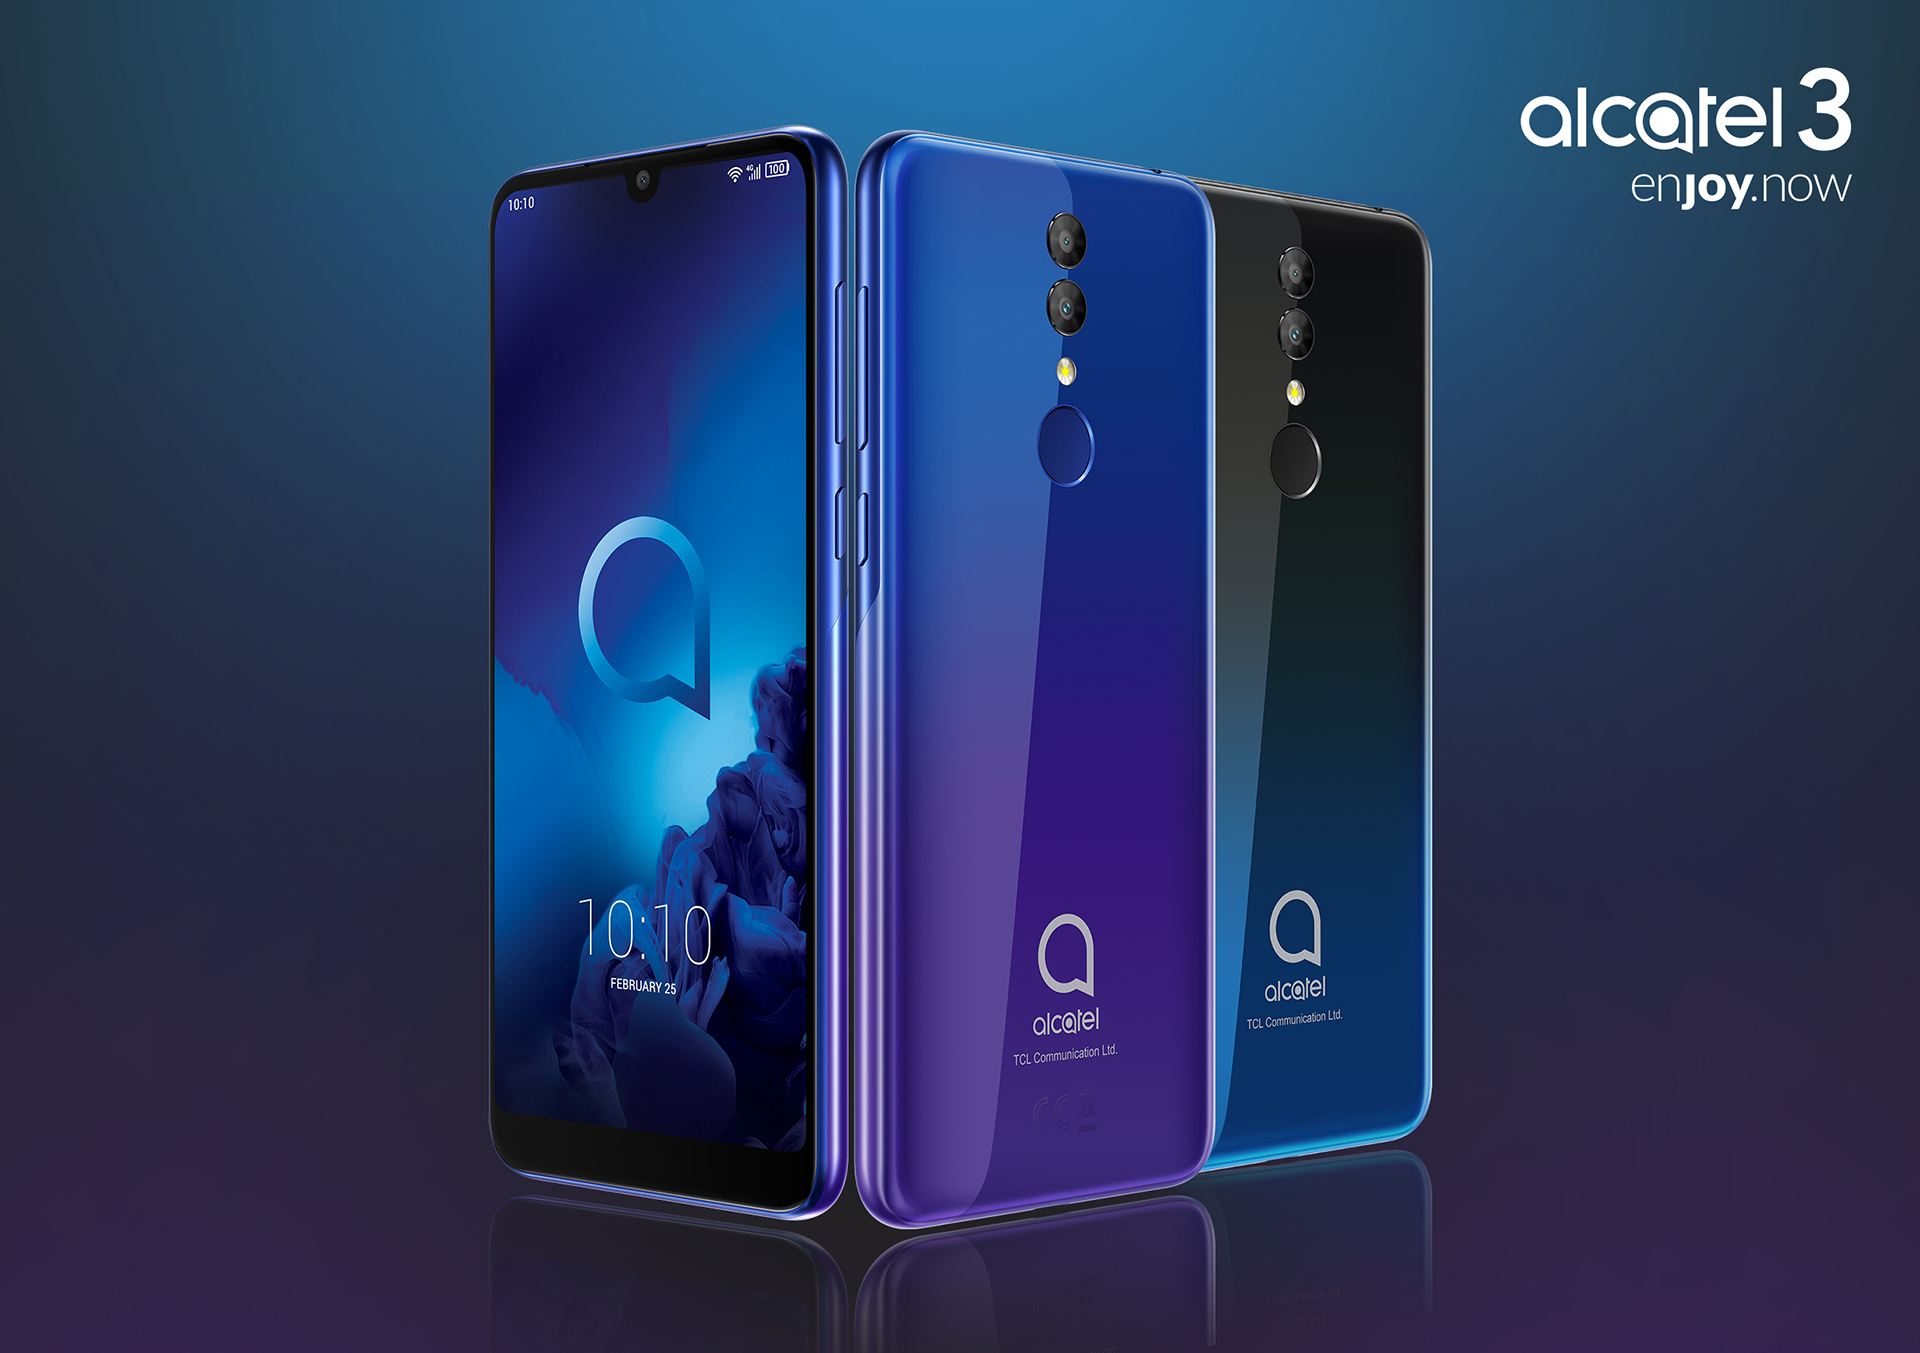 Alcatel offers three new highly affordable phones